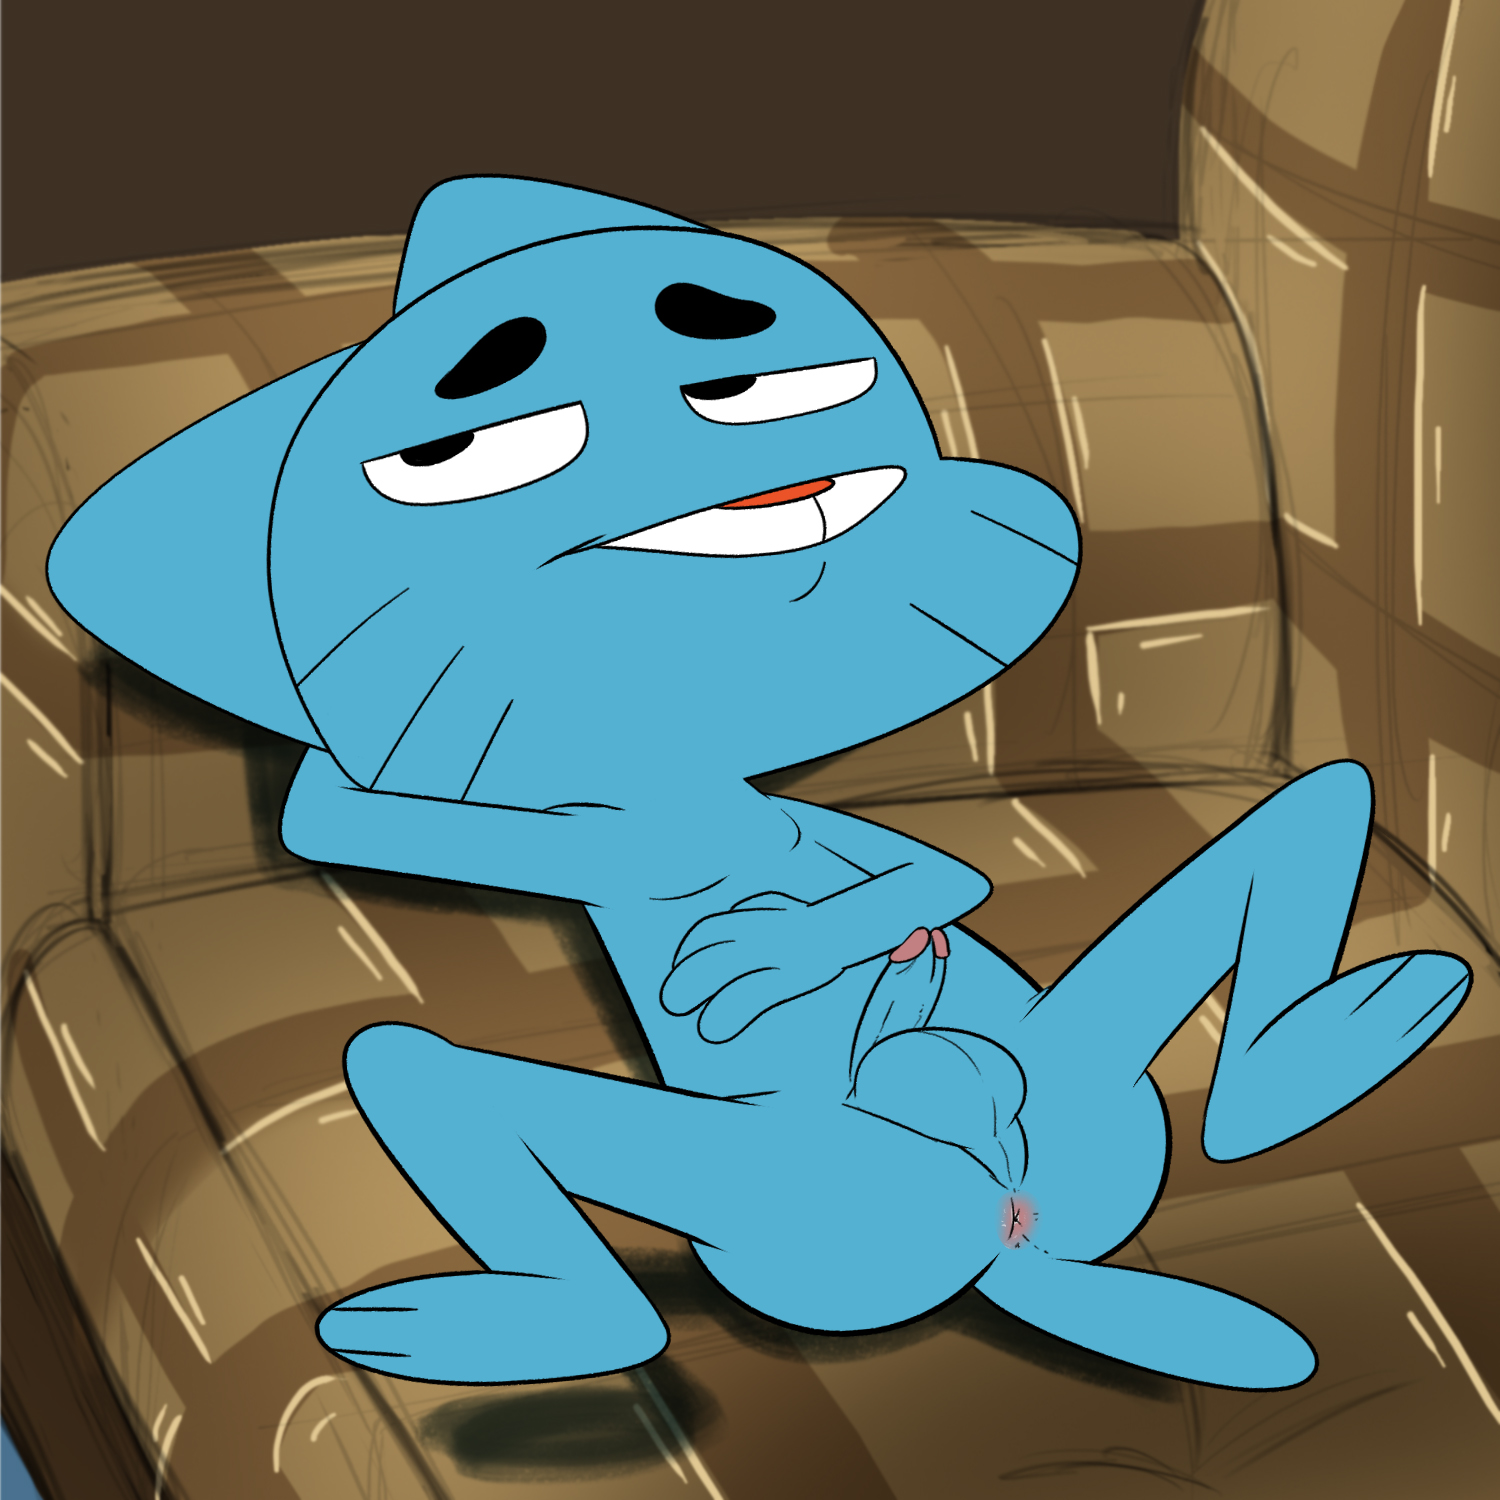 Cartoon Network Gumball Wiki nude pic, sex photos Cartoon Network Gumball W...